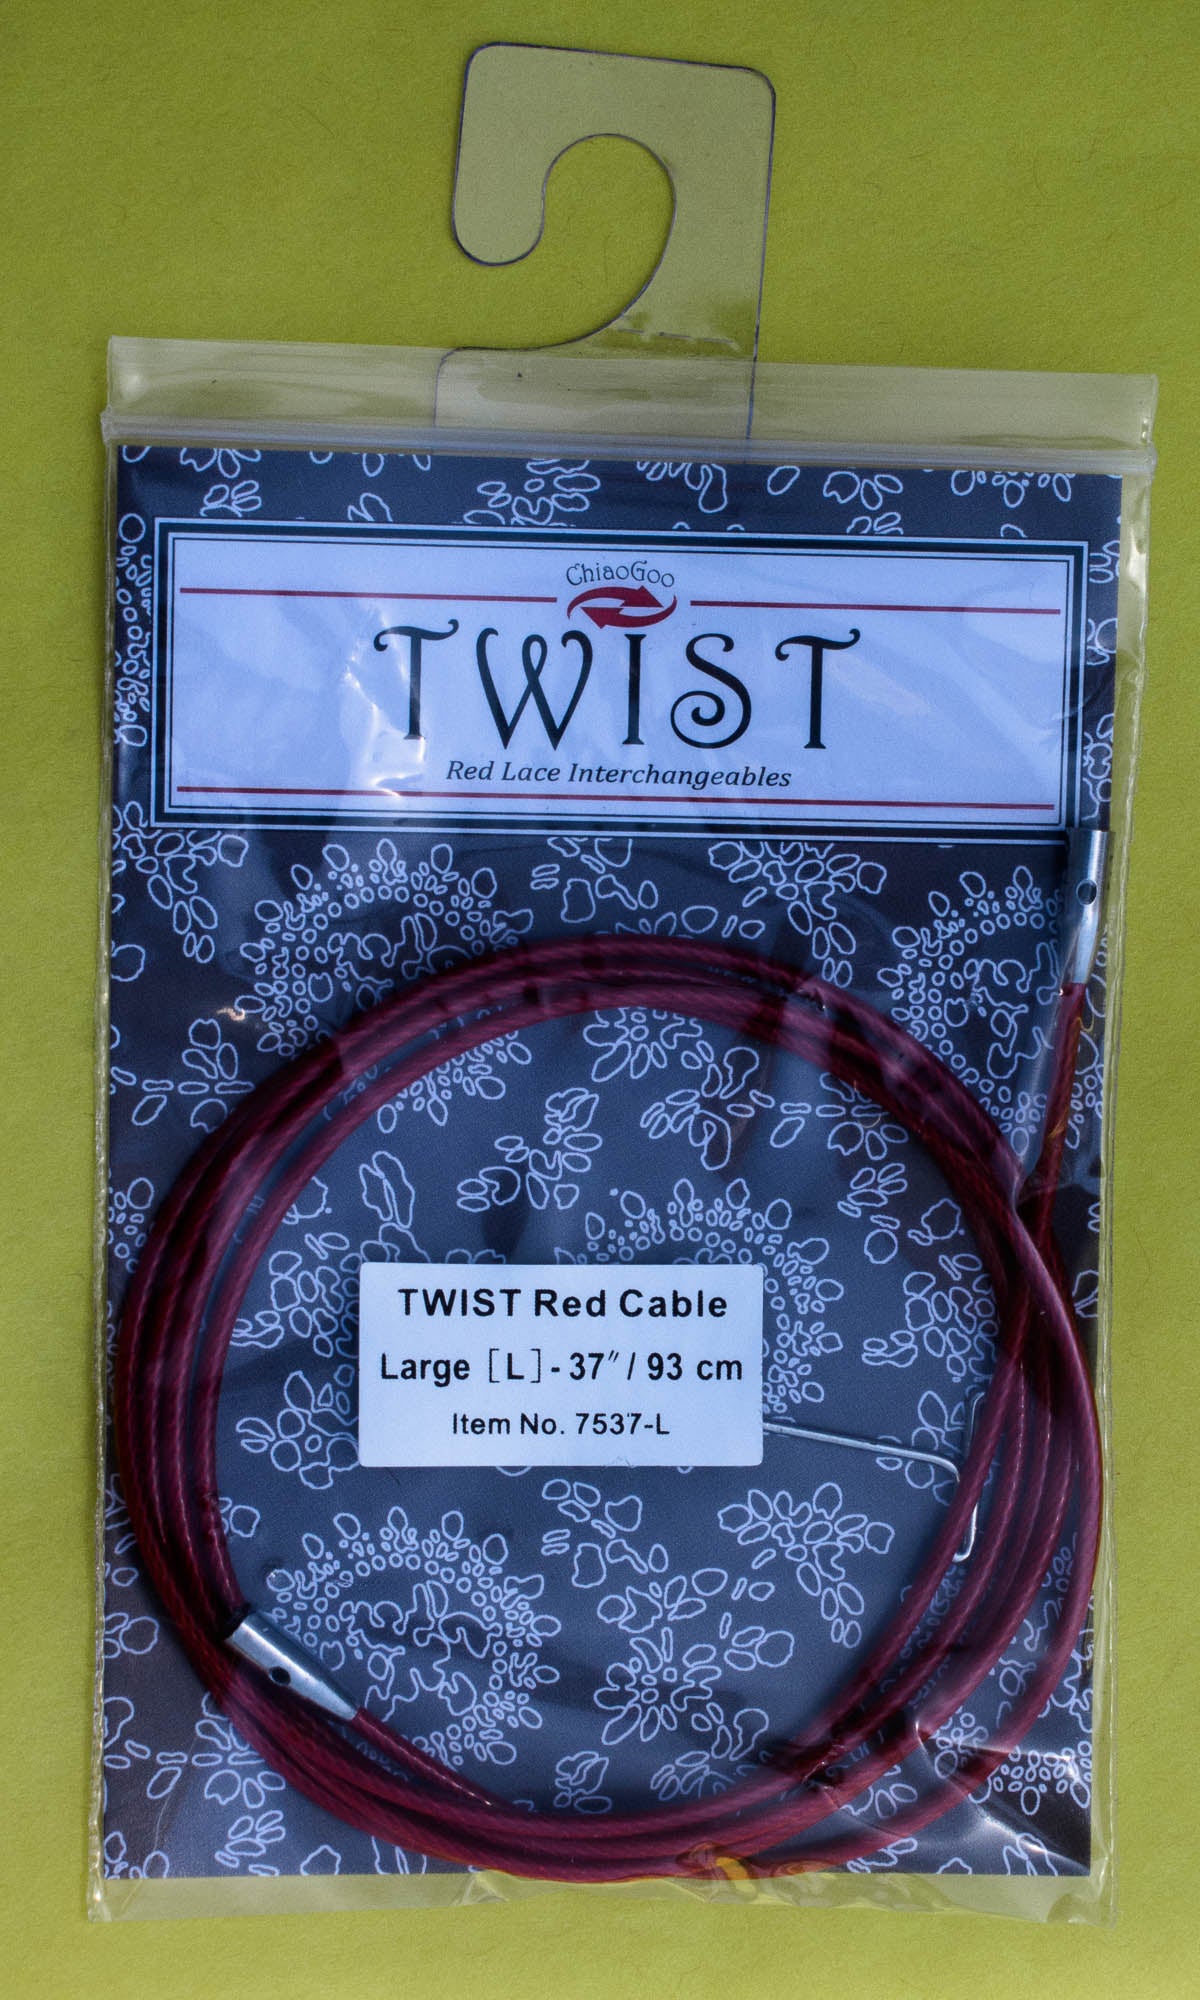 ChiaoGoo Twist Red Lace Interchangeable Cables 14 inch-Large